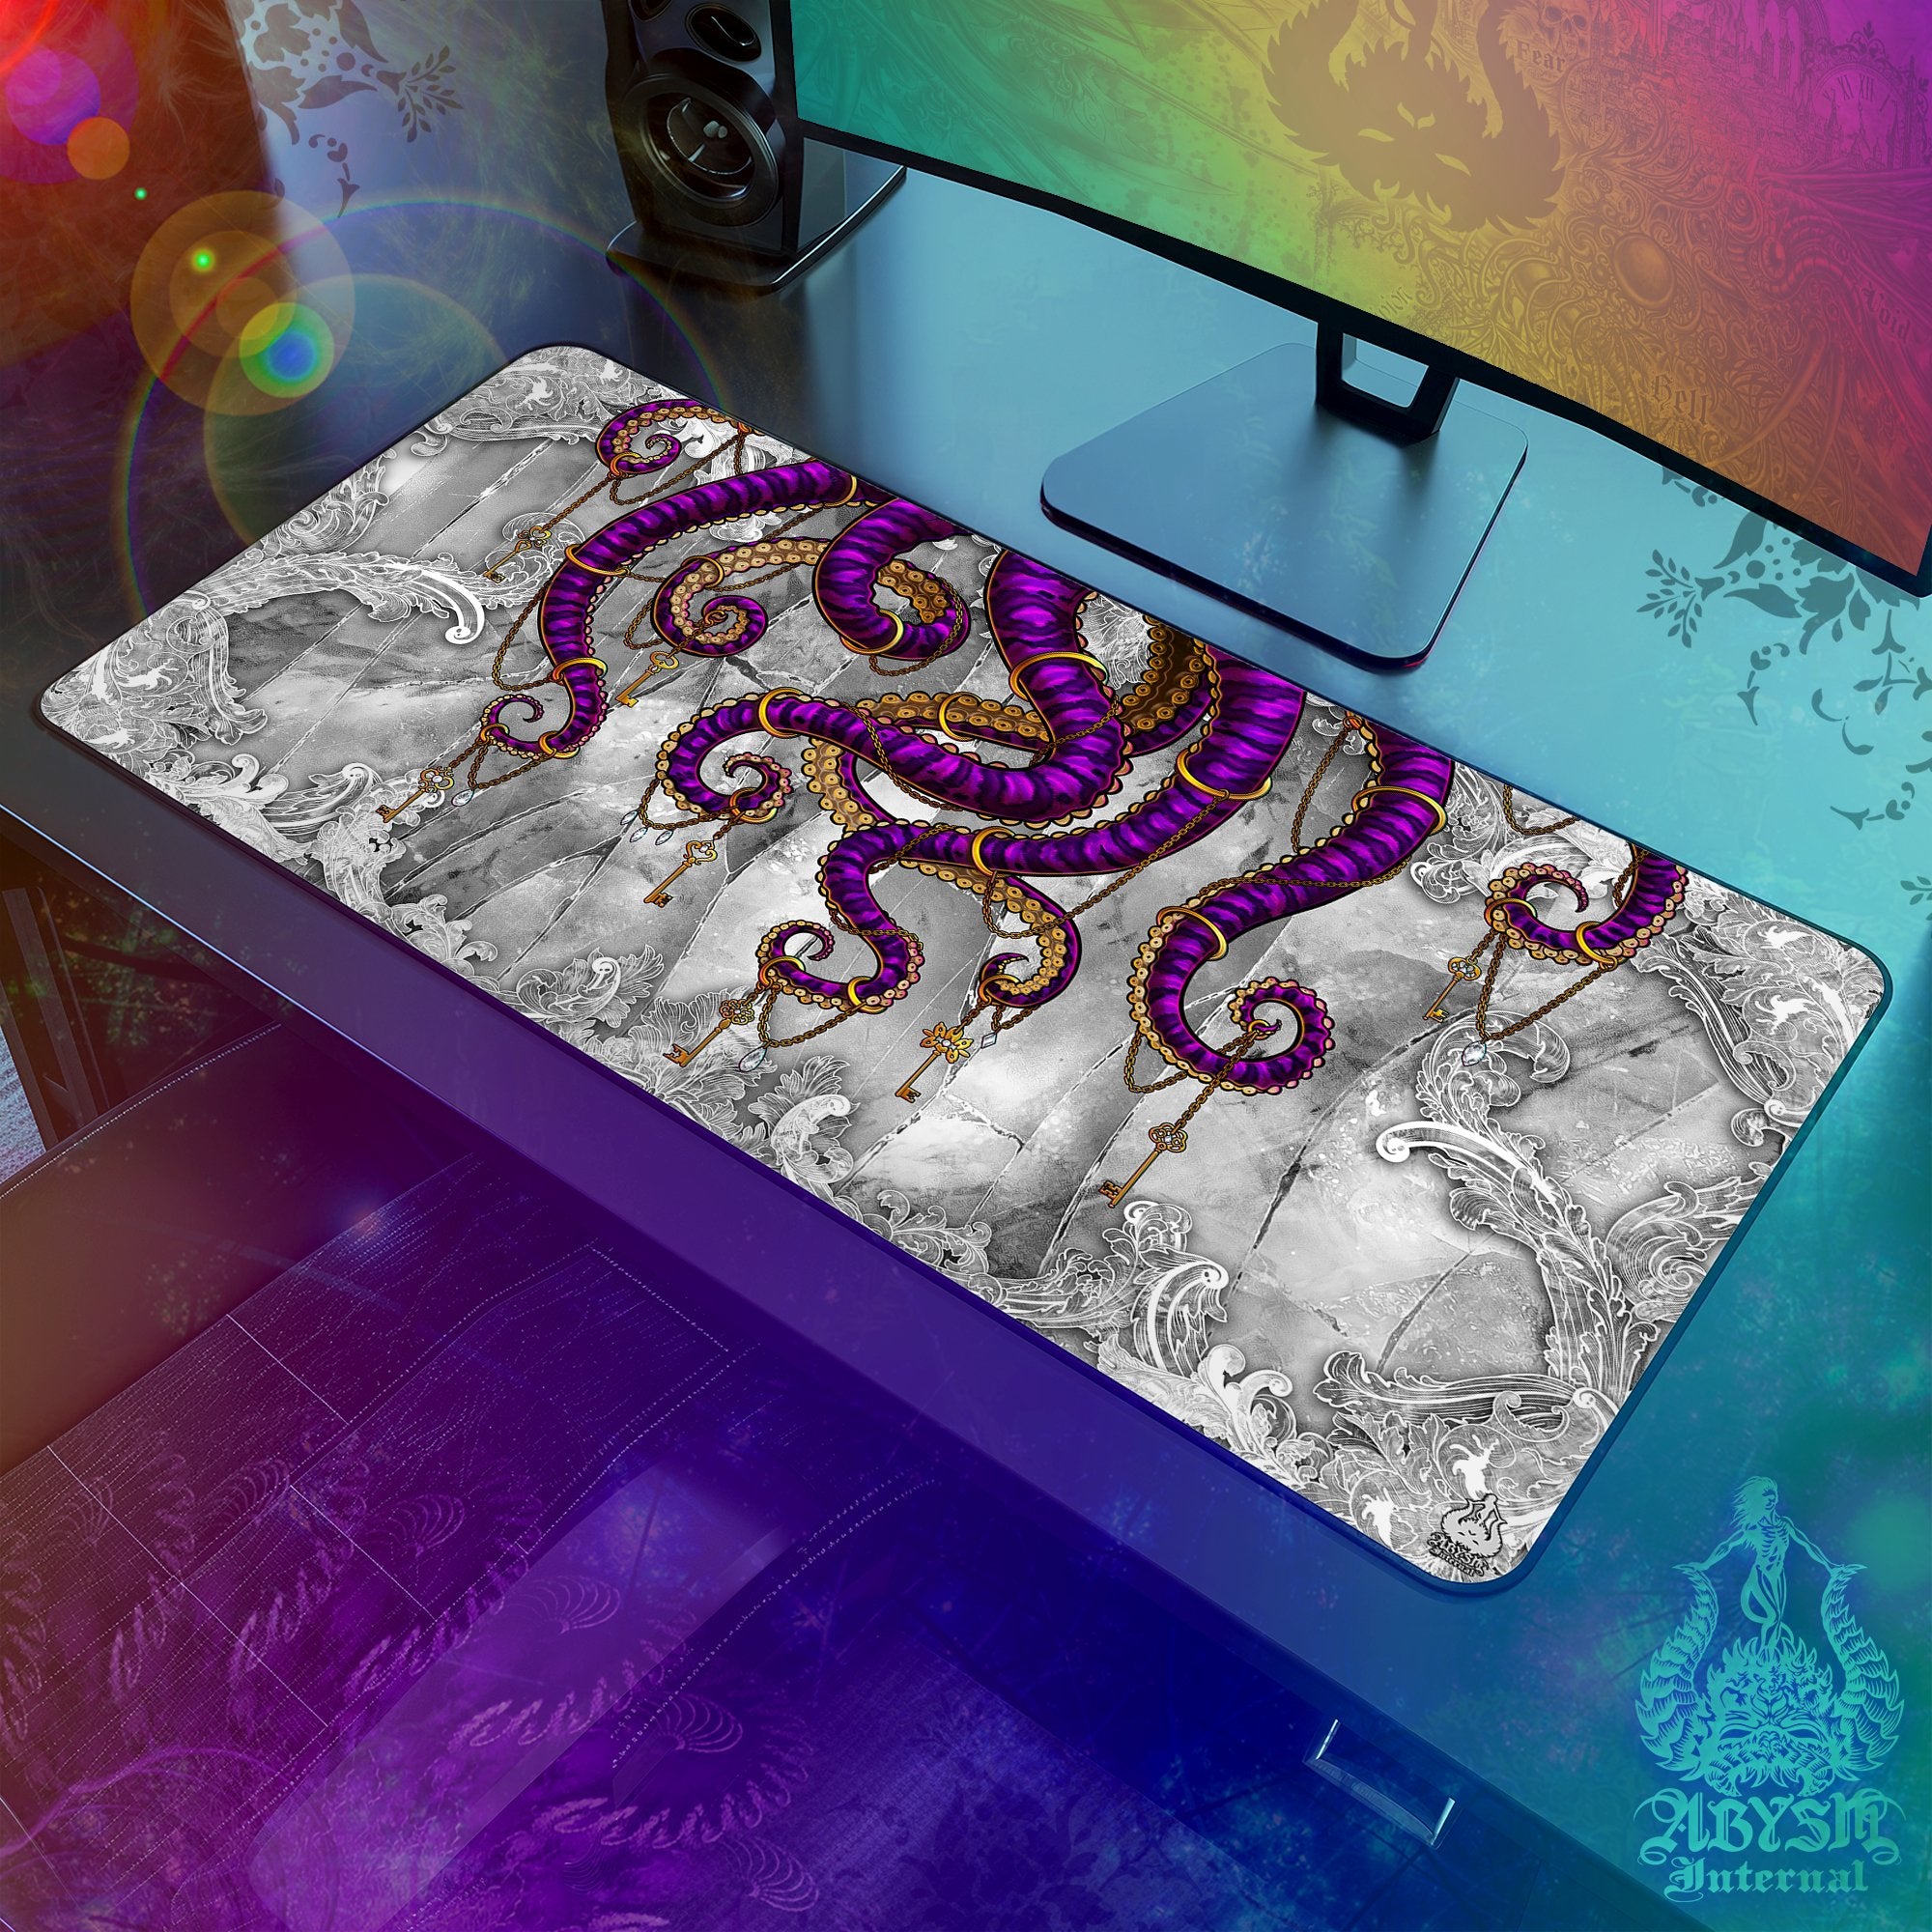 Octopus Workpad, Purple Tentacles Desk Mat, Colorful Gaming Mouse Pad, Gamer Table Protector Cover, Fantasy Art Print - Stone, Sand, 2 Colors - Abysm Internal